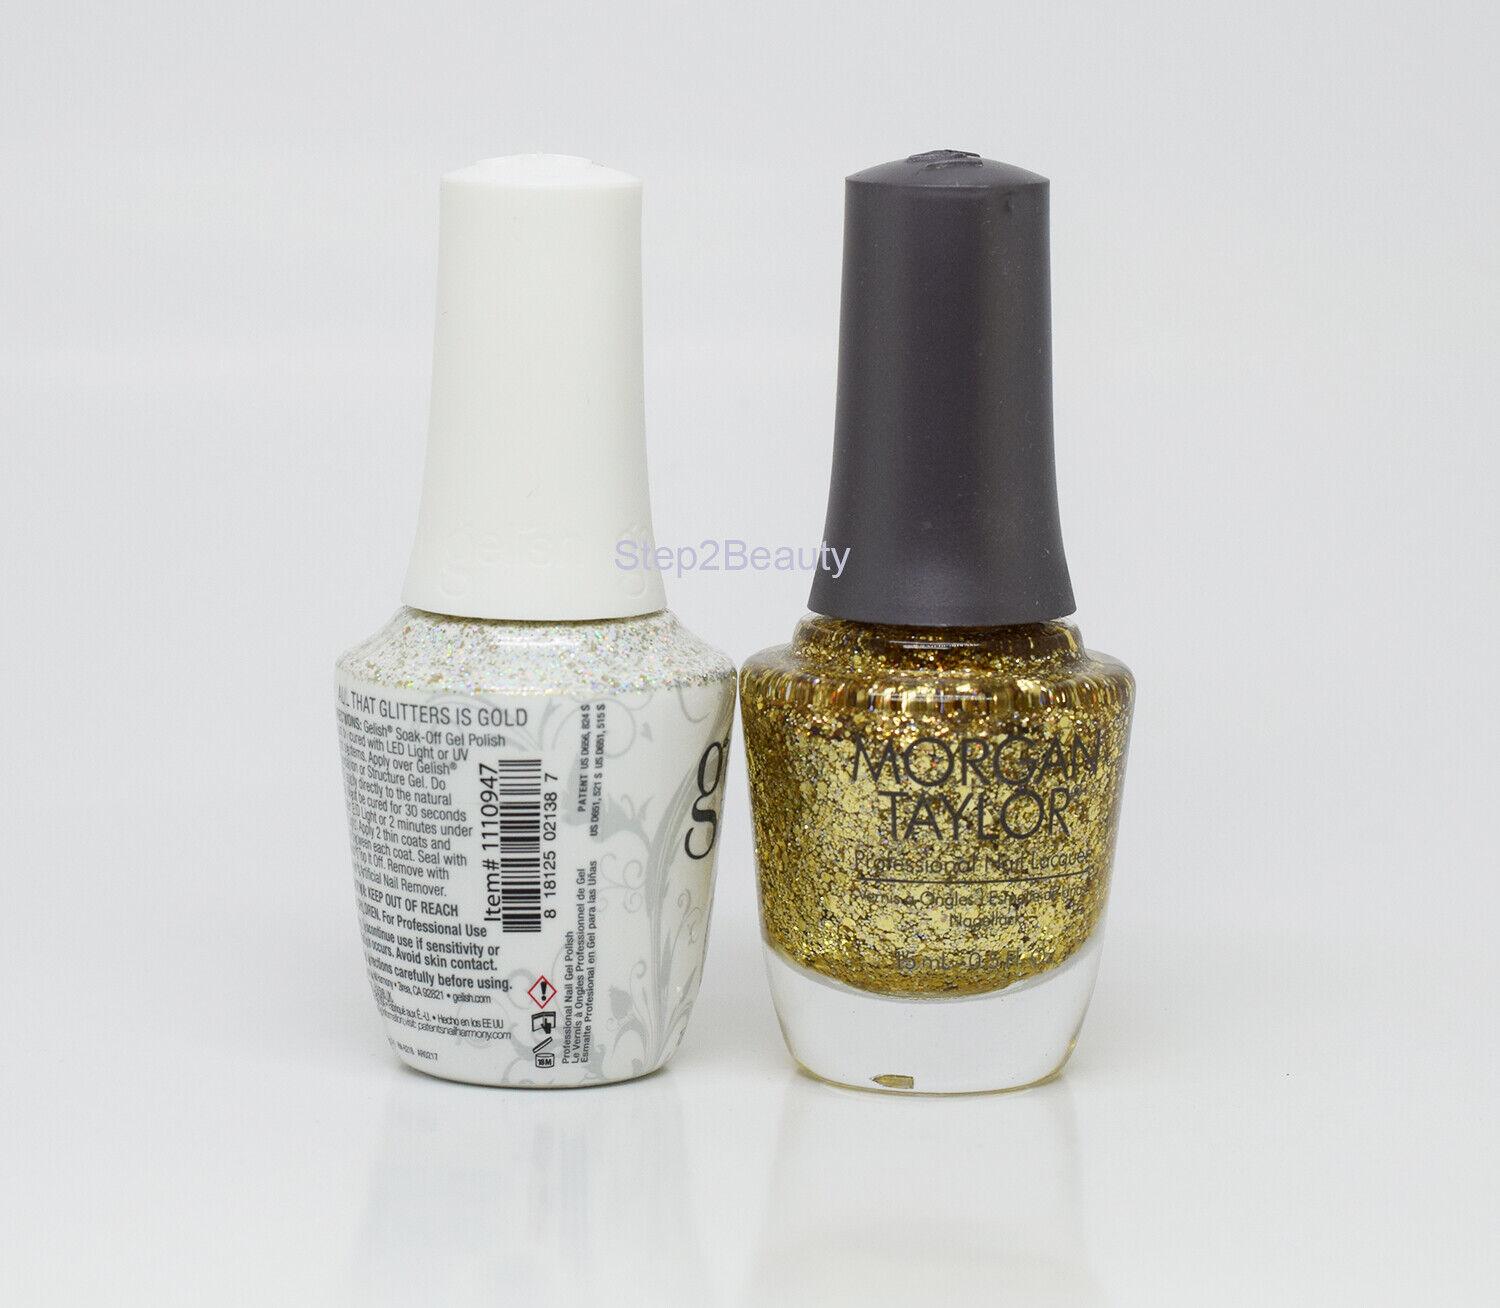 Gelish DUO Soak Off Gel Polish + Morgan Taylor Lacquer -#947 All That Glitter is